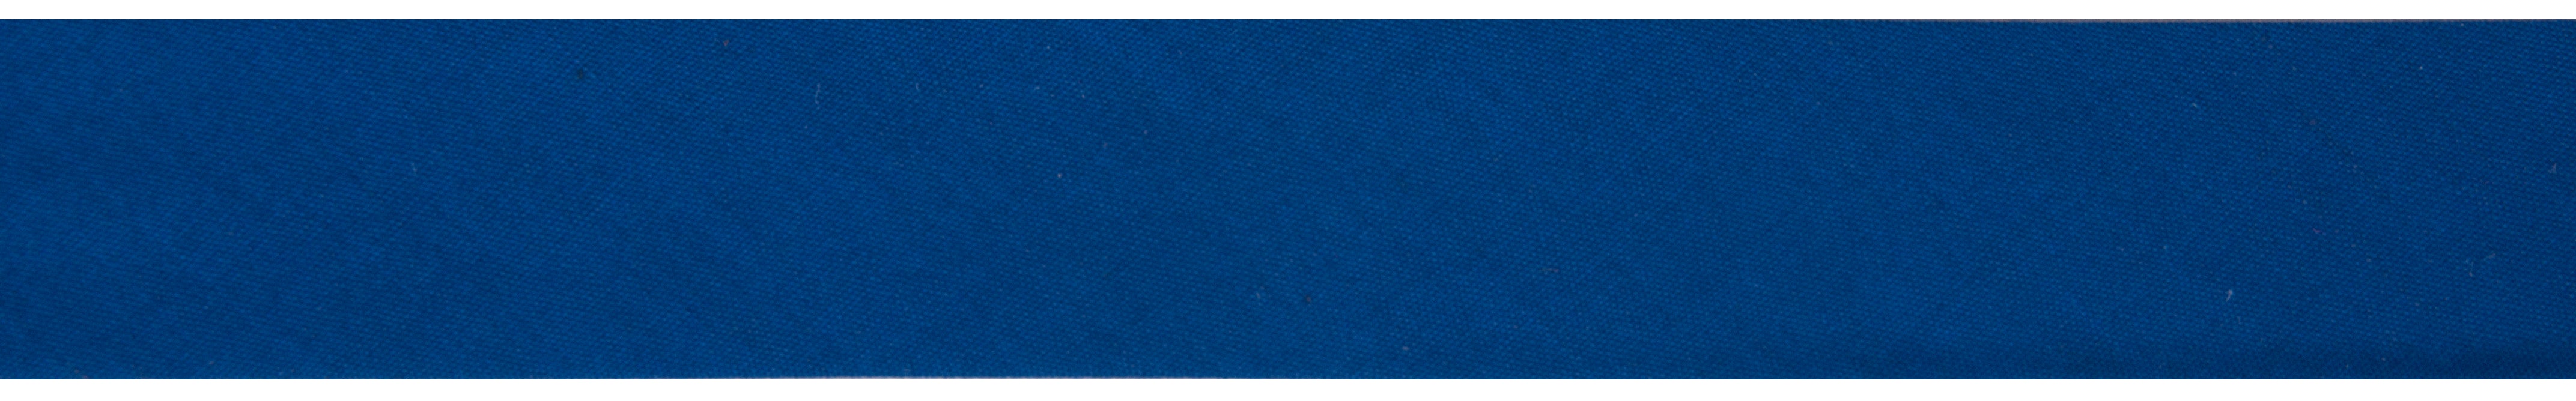 20m roll of Royal Blue Bias Binding | 25mm width from Jaycotts Sewing Supplies